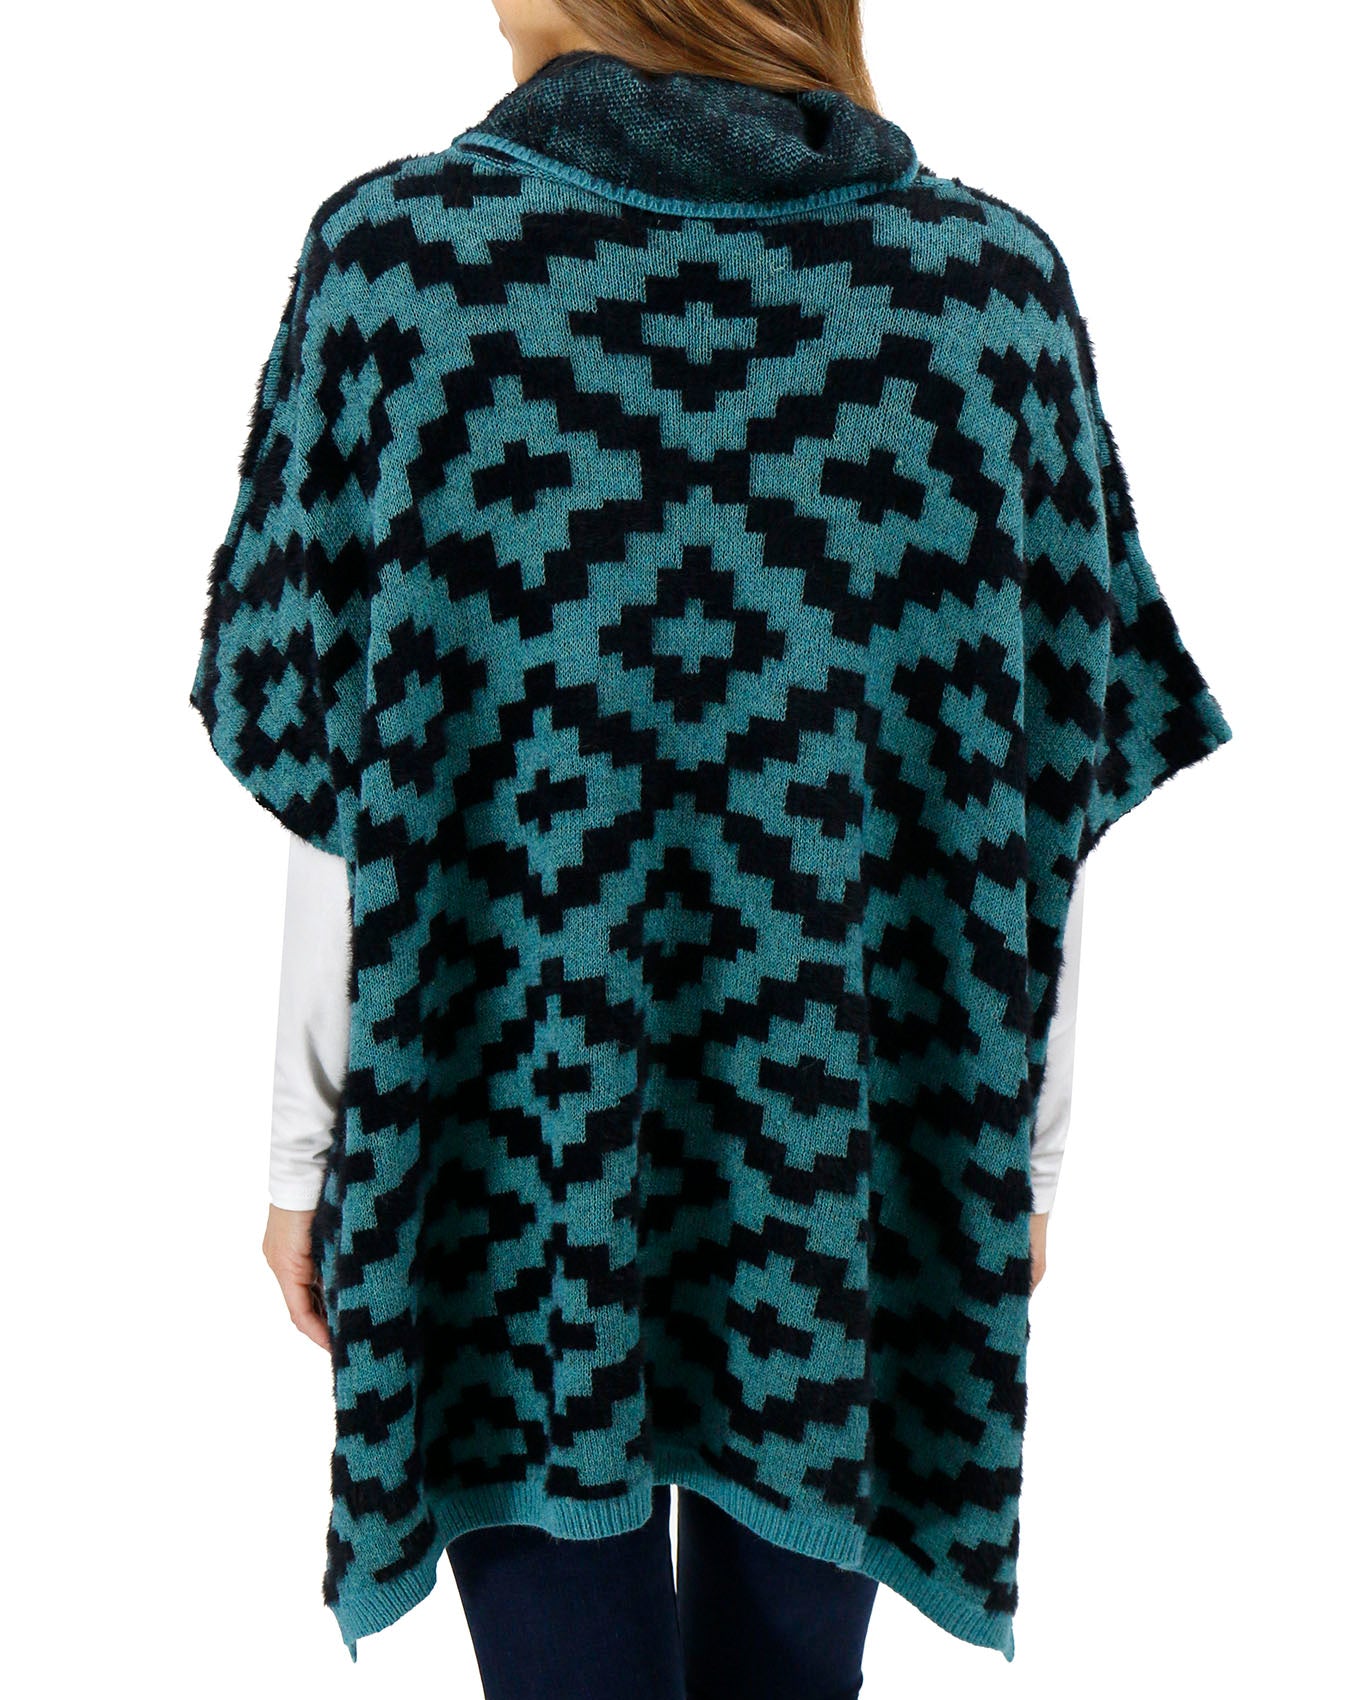 Back view stock shot of Teal Aztec Cozy Cowl Neck Pullover